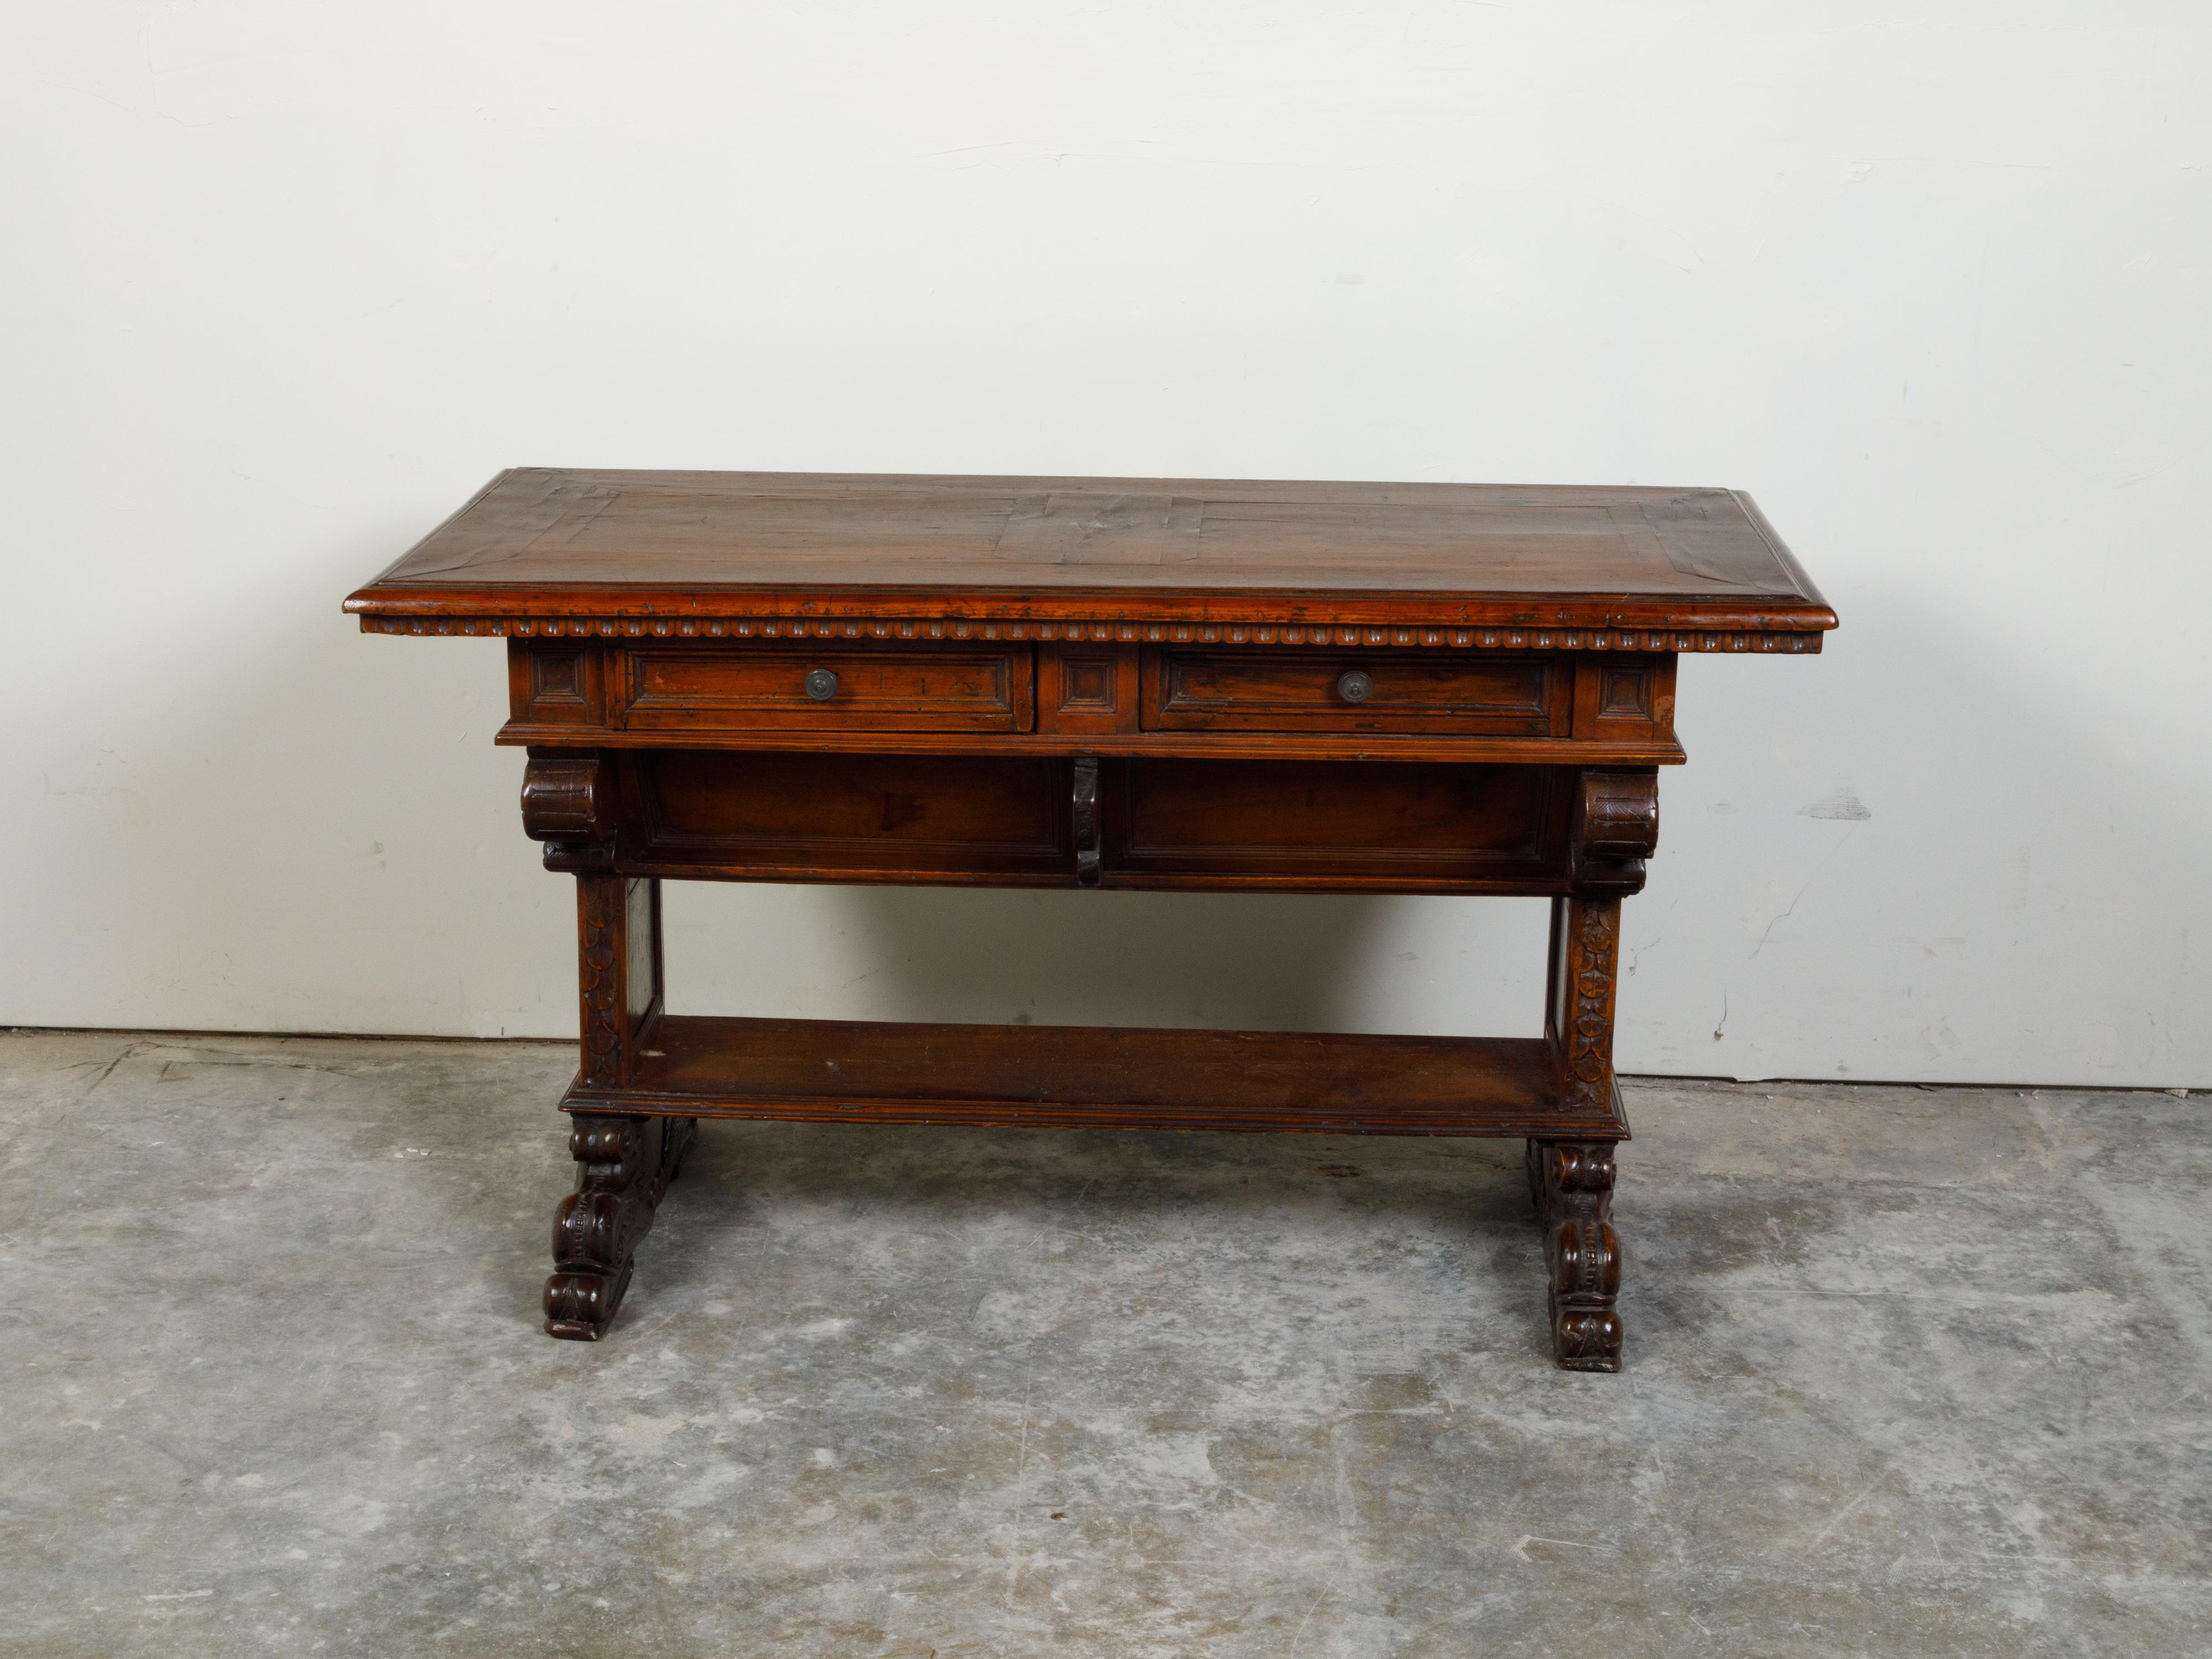 An Italian walnut table from the early 19th century, with carved motifs and two drawers. Created in Italy during the early years of the 19th century, this walnut table features a rectangular top sitting above a scoop molding. Showcasing two drawers,